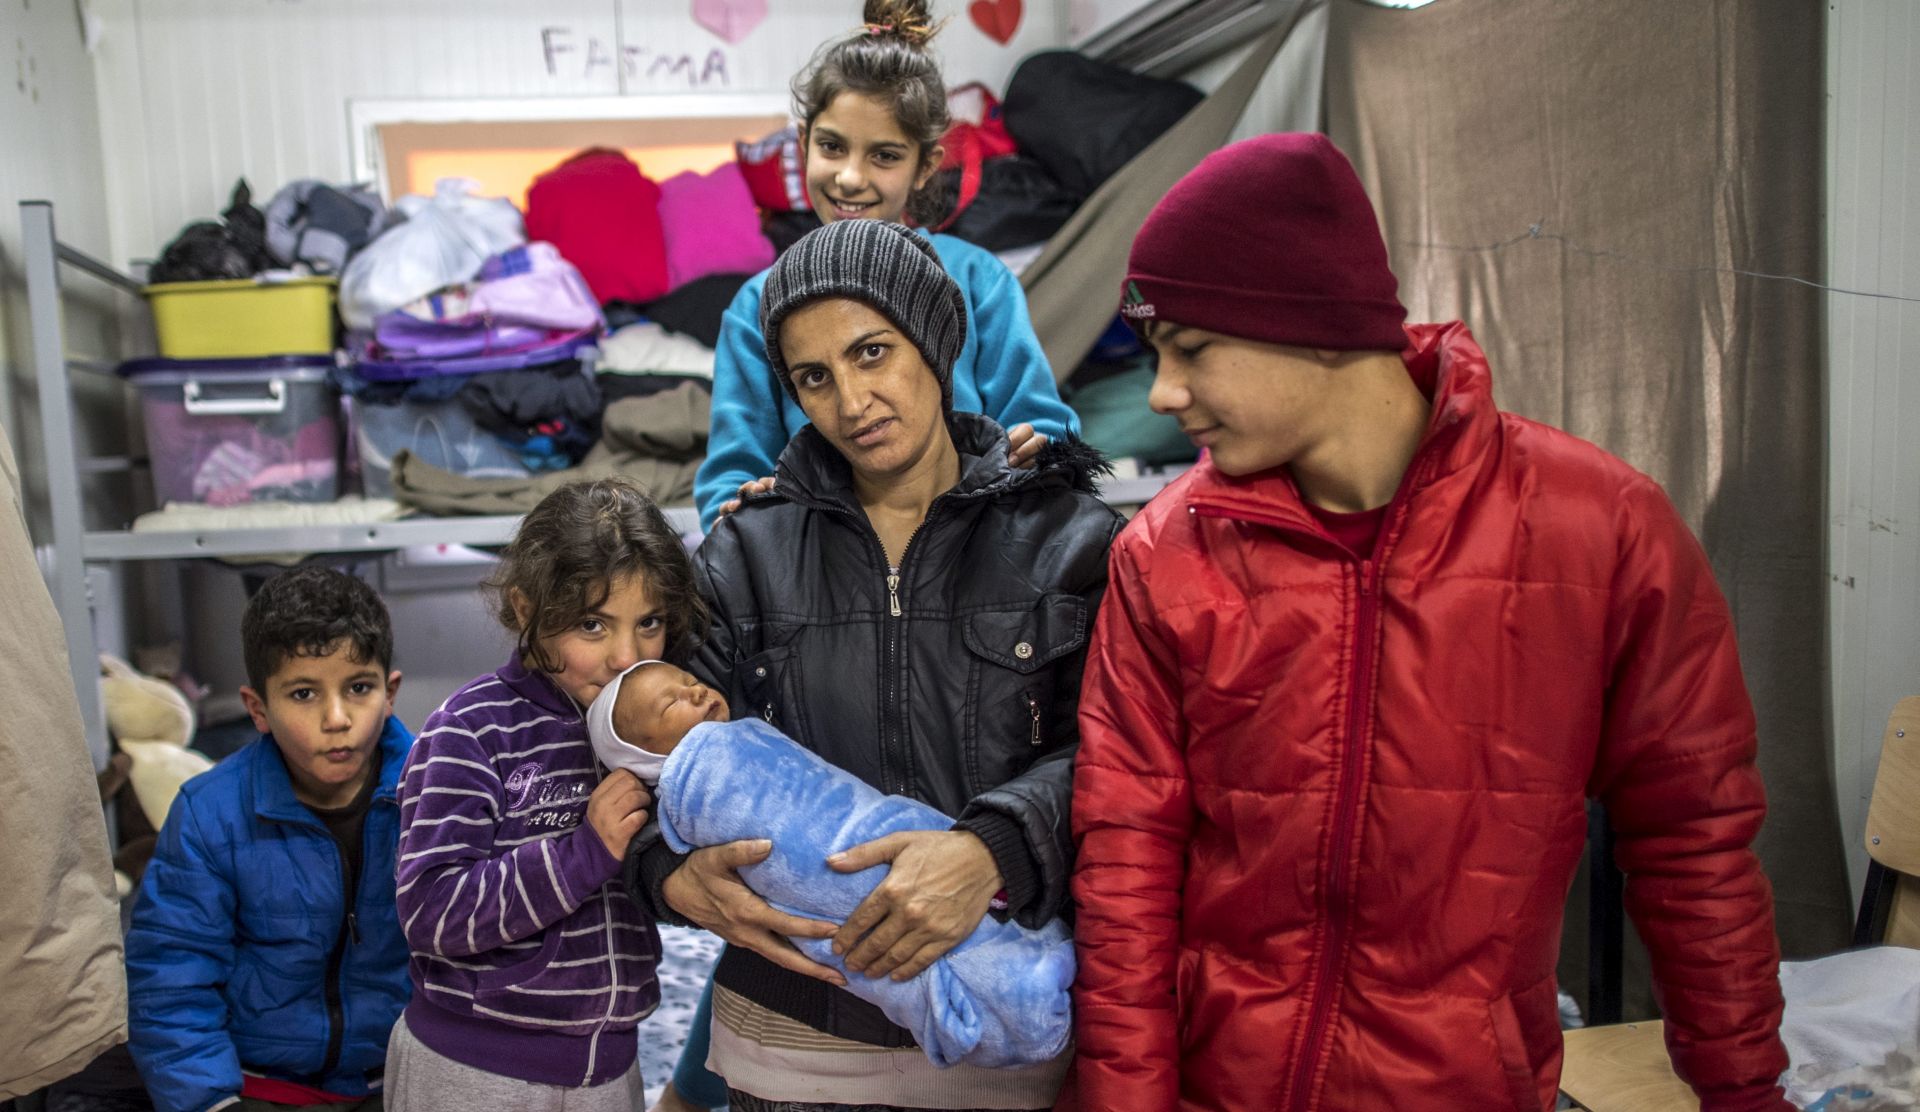 epa05728150 Shirin Kurdi, 32, mother of five children, holds her newly born baby Iljaz Rasul (five days old) in her barrack at the transit center for refugees and migrants near northern Macedonian village of Tabanovce on the border with Serbia, The Former Yugoslav Republic of Macedonia, 18 January 2017. Shirin Kurdi (Syrian Kurd) with her children are stuck in the transit camp for the last 10 months. According to the director of the transit center, Goran Stojanovski, there are currently 102 staying refugees and migrants at the center.  EPA/GEORGI LICOVSKI